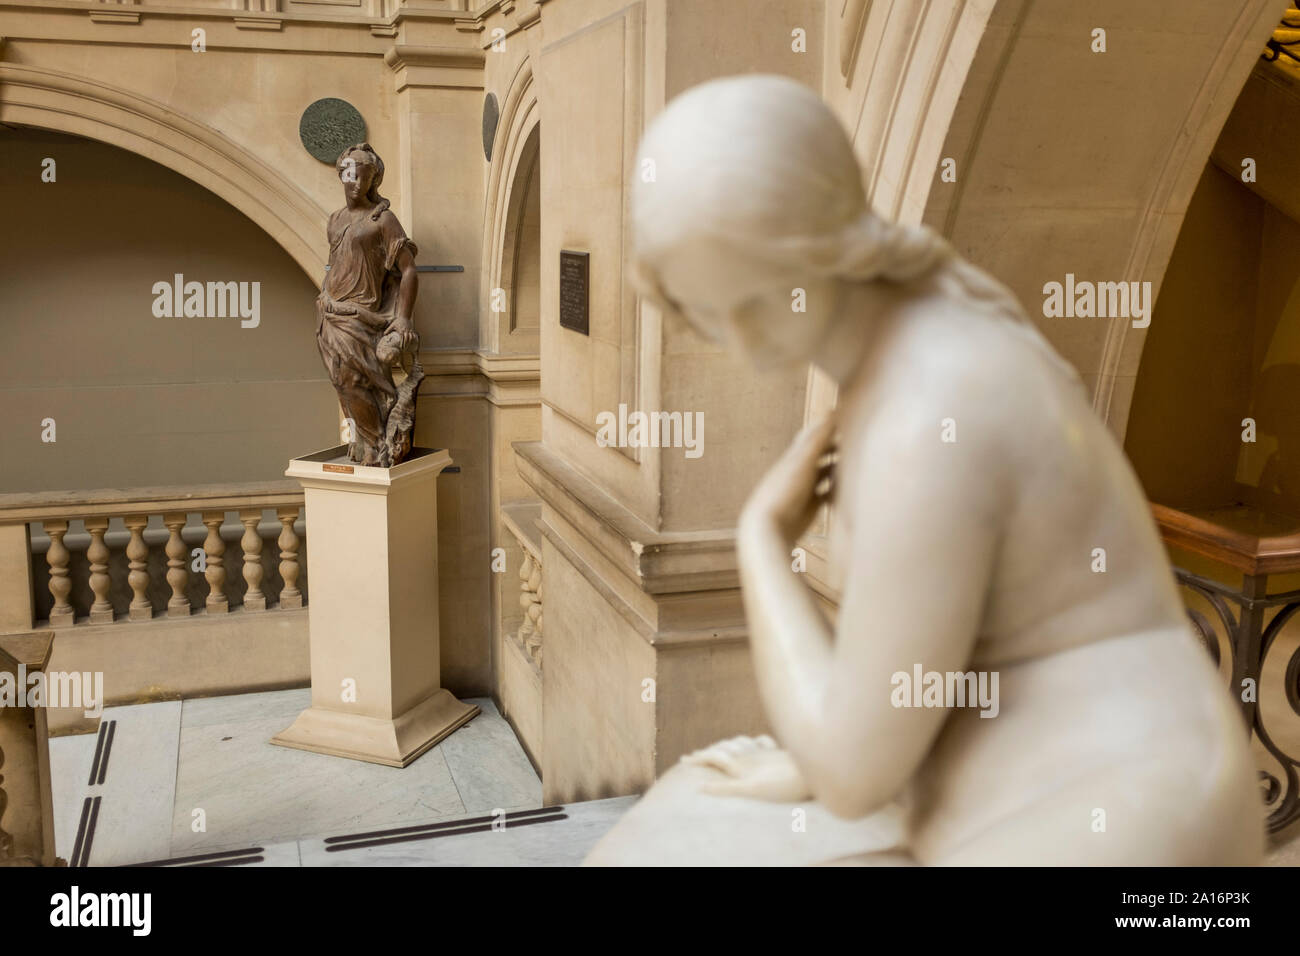 Sculptures in the staircase, Bristol Museum & Art Gallery, UK Stock Photo